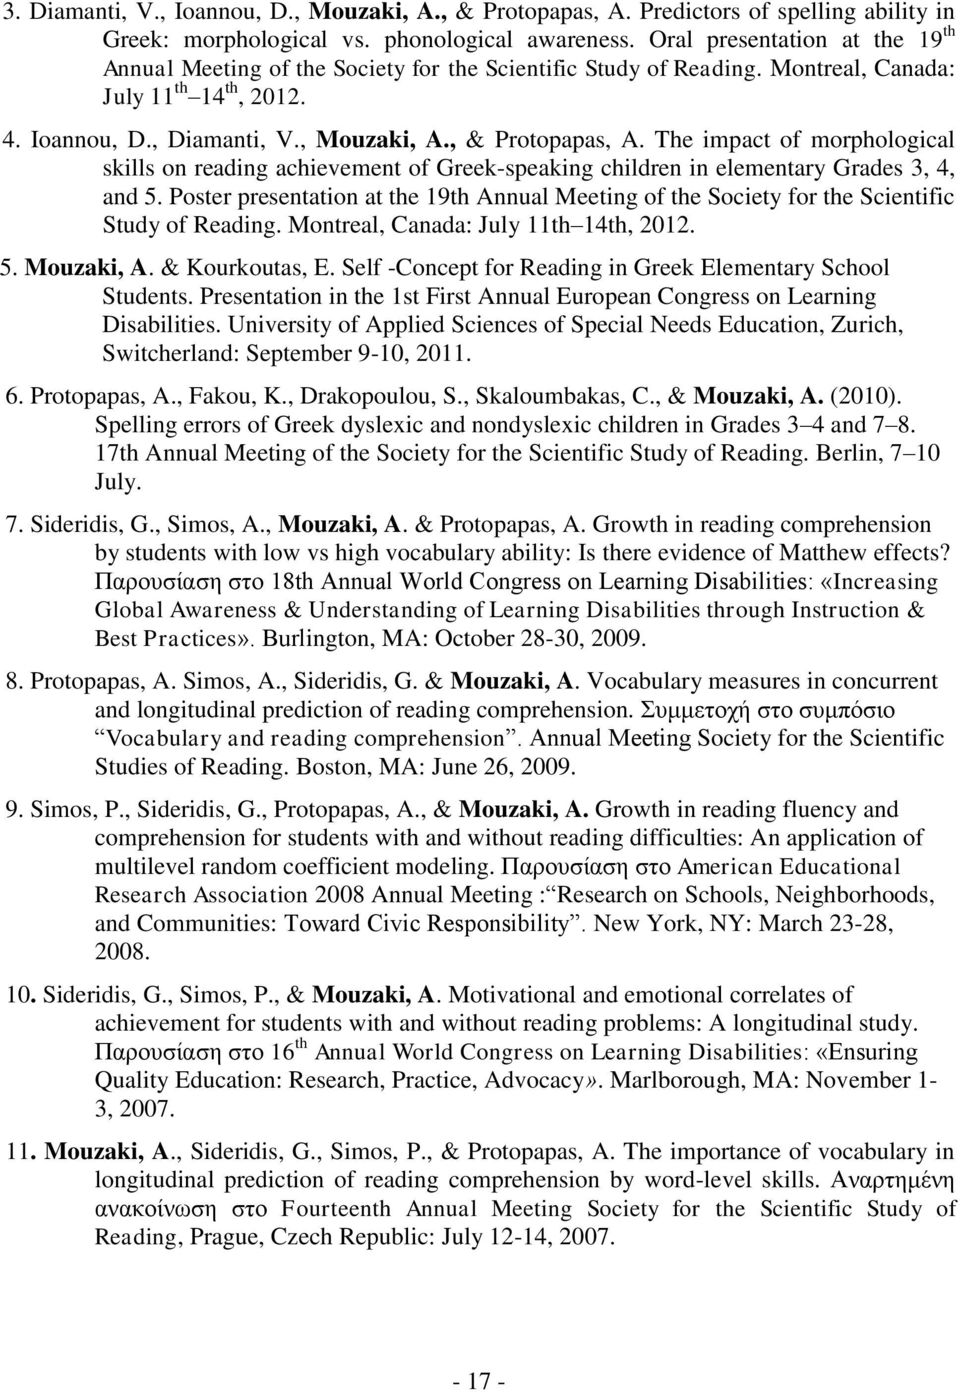 The impact of morphological skills on reading achievement of Greek-speaking children in elementary Grades 3, 4, and 5.